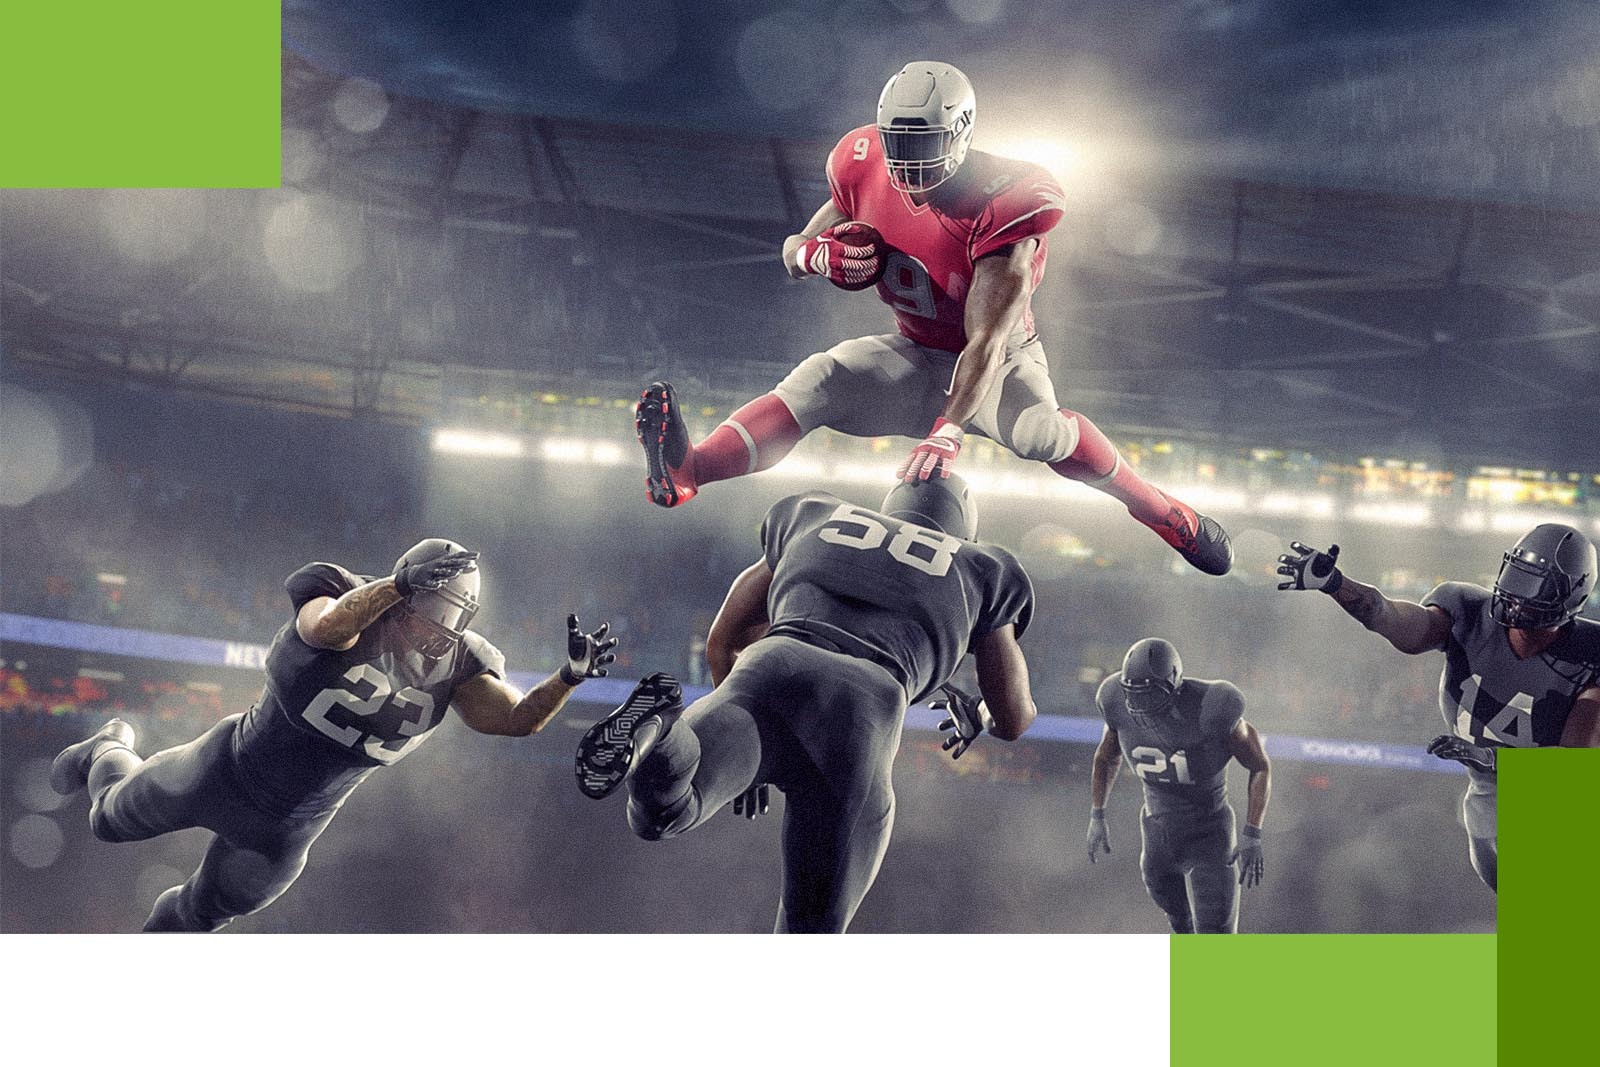 photorealistic 3d rendering of football player hopping over the opposing...